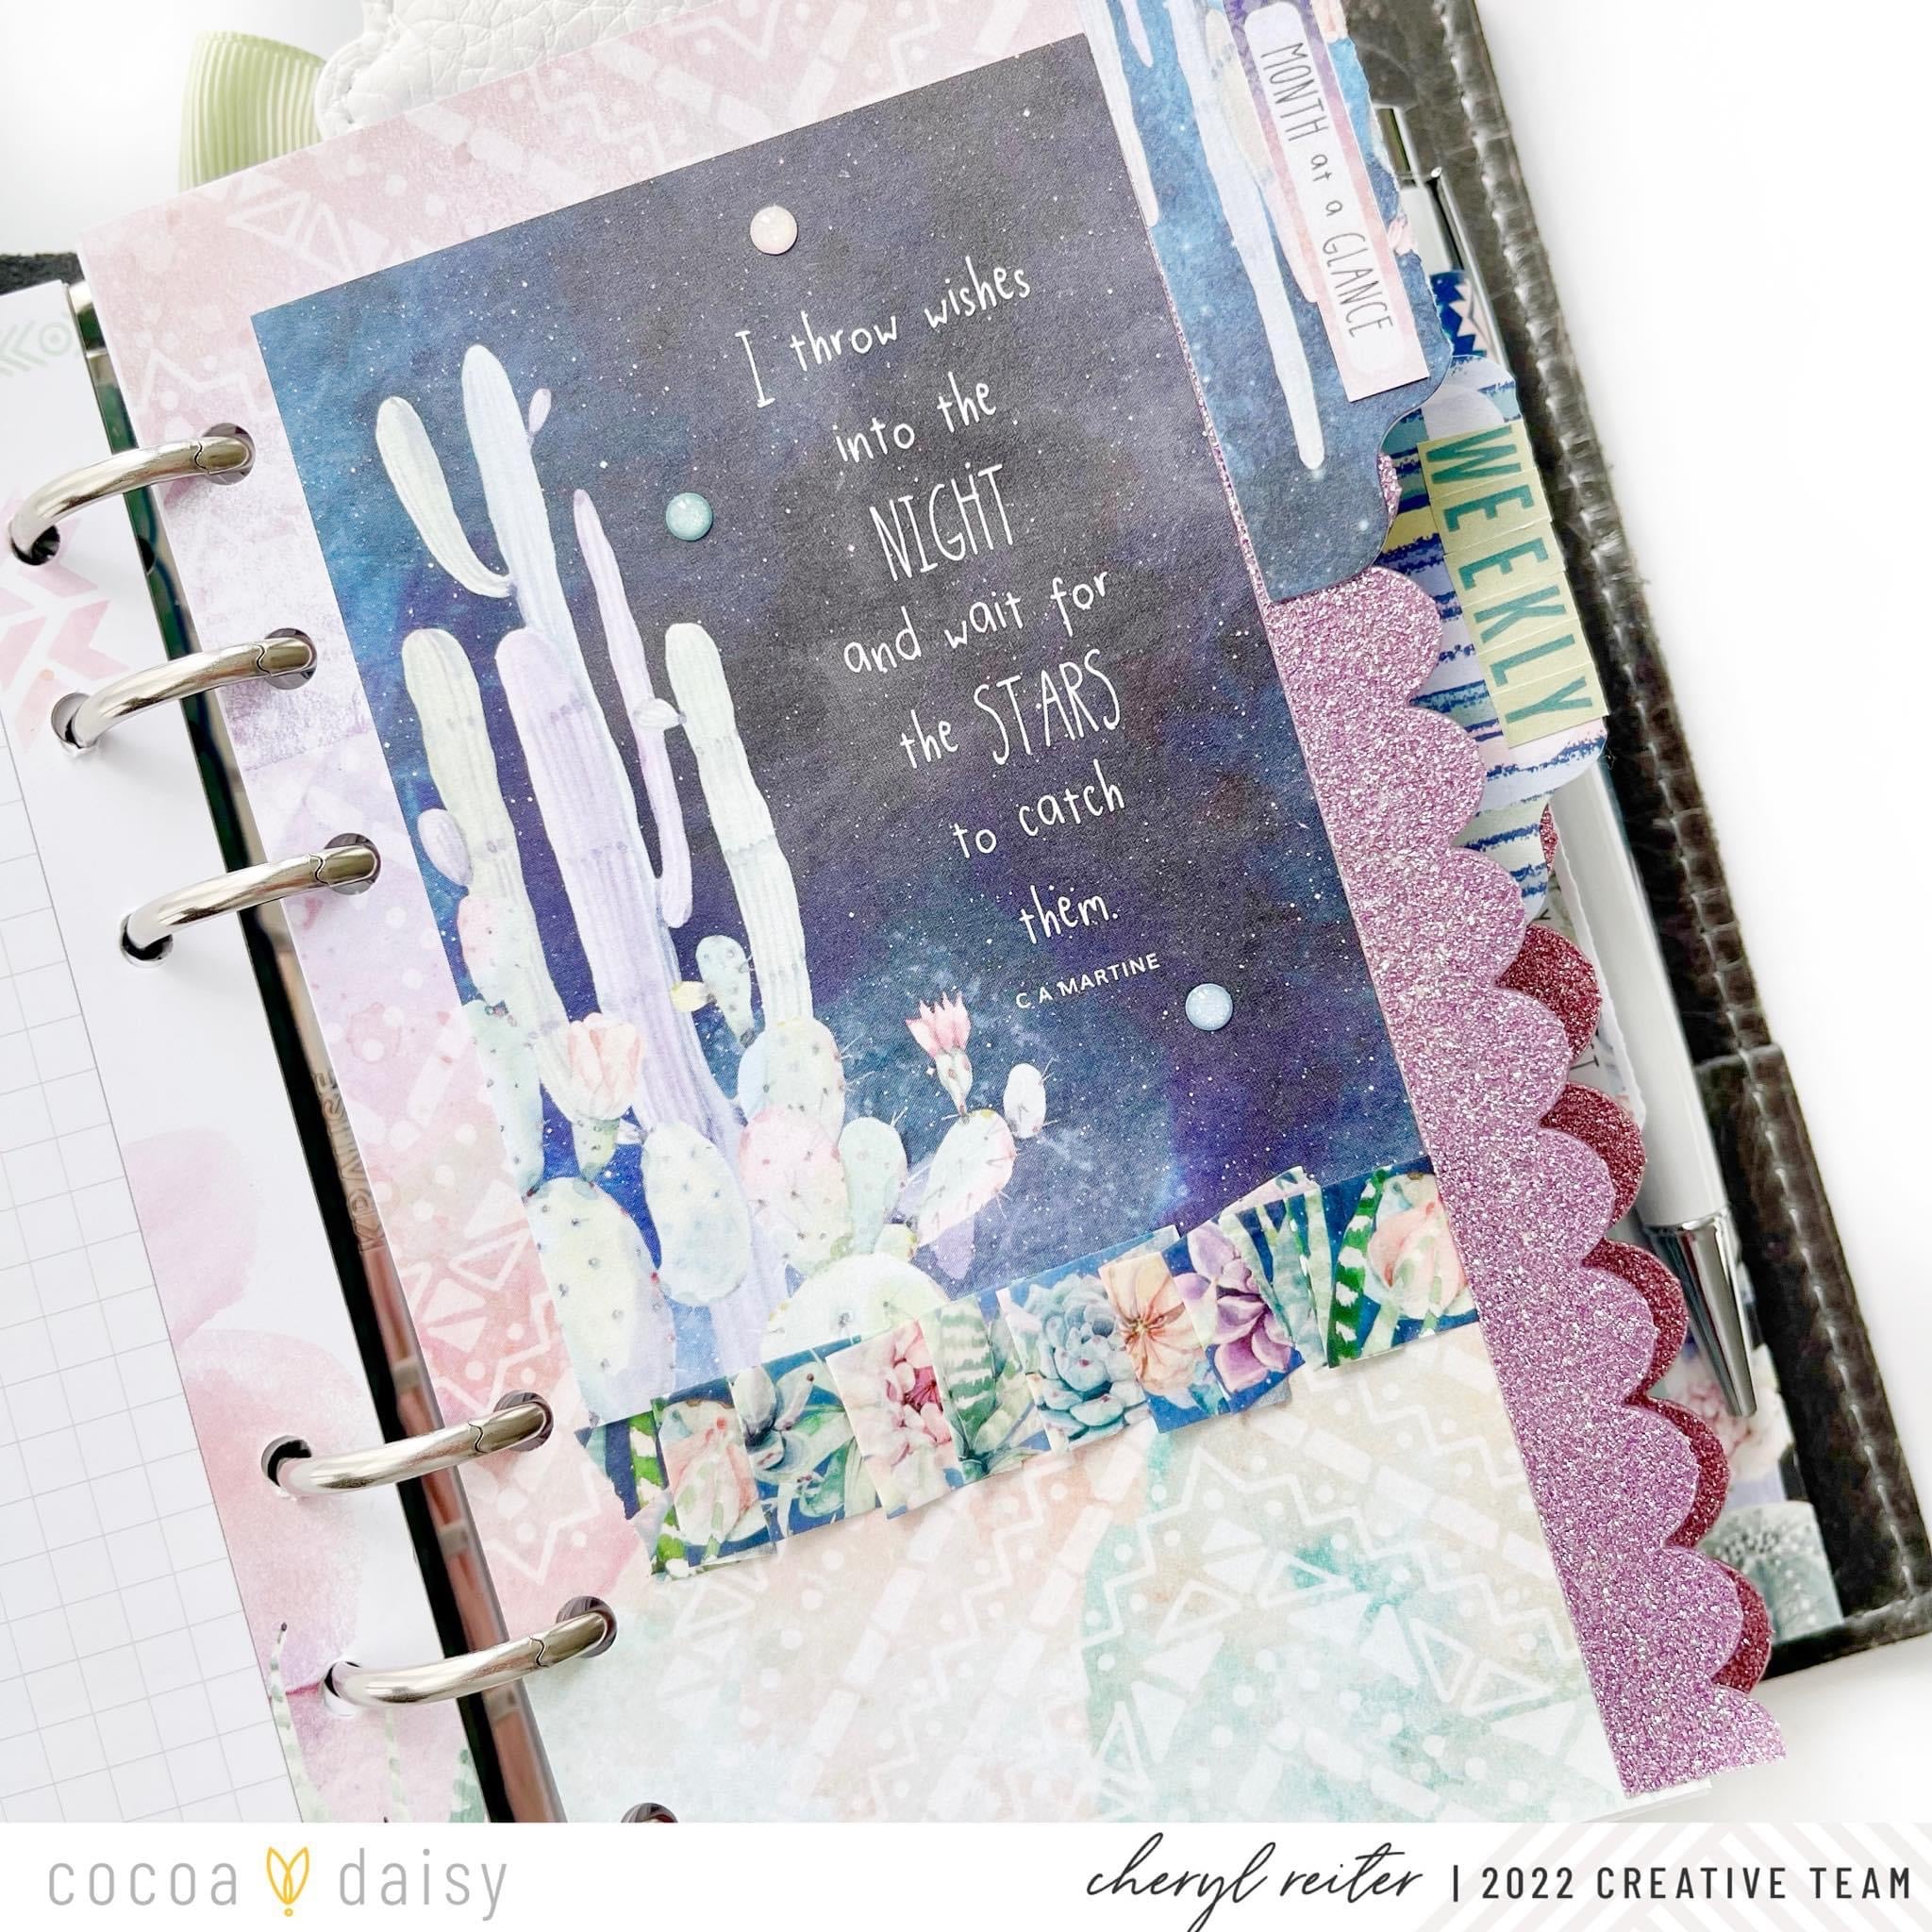 Planner Setup is a Snap with Cocoa Daisy